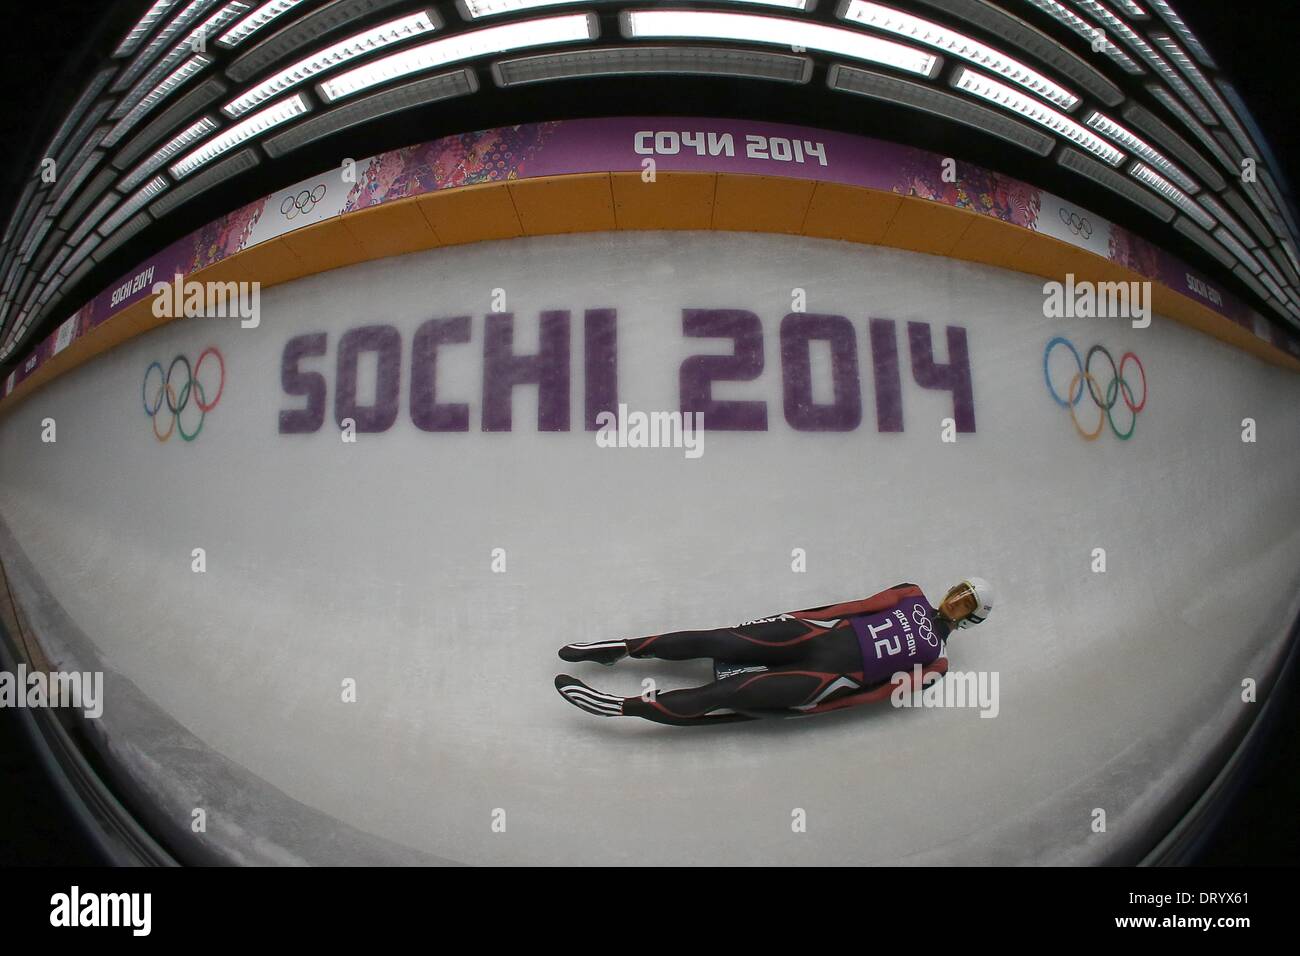 Krasnaya Polyana, Russia. 05th Feb, 2014. Kristaps Maurins of Latvia in action during the Men's Luge training session at the Sanki Sliding Center in Krasnaya Polyana, Russia, 05 February 2014. The Sochi 2014 Olympic Games run from 07 to 23 February 2014. Photo: Fredrik von Erichsen/dpa/Alamy Live News Stock Photo